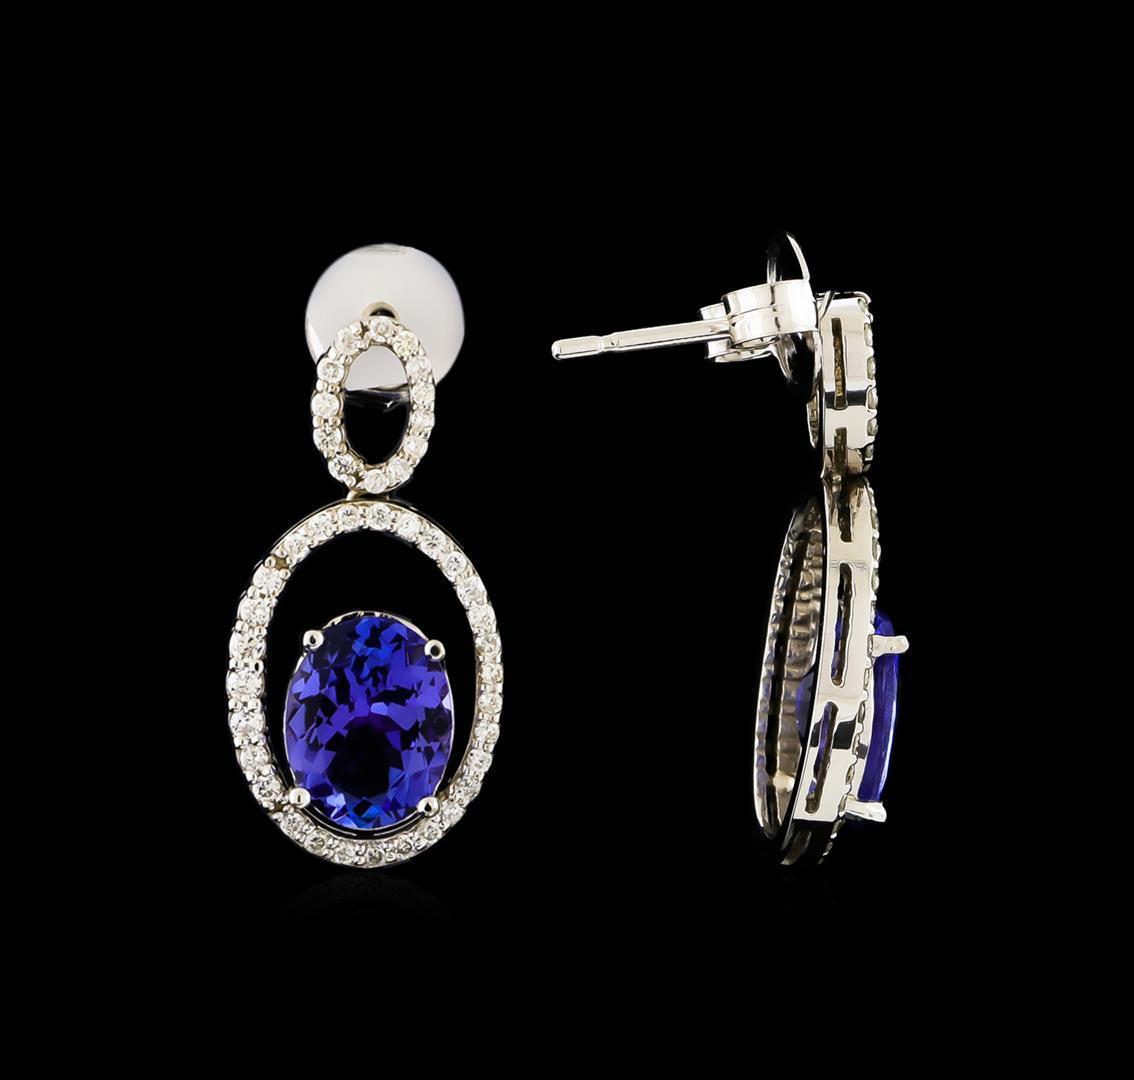 3.58 ctw Tanzanite and Diamond Earrings - 14KT White Gold